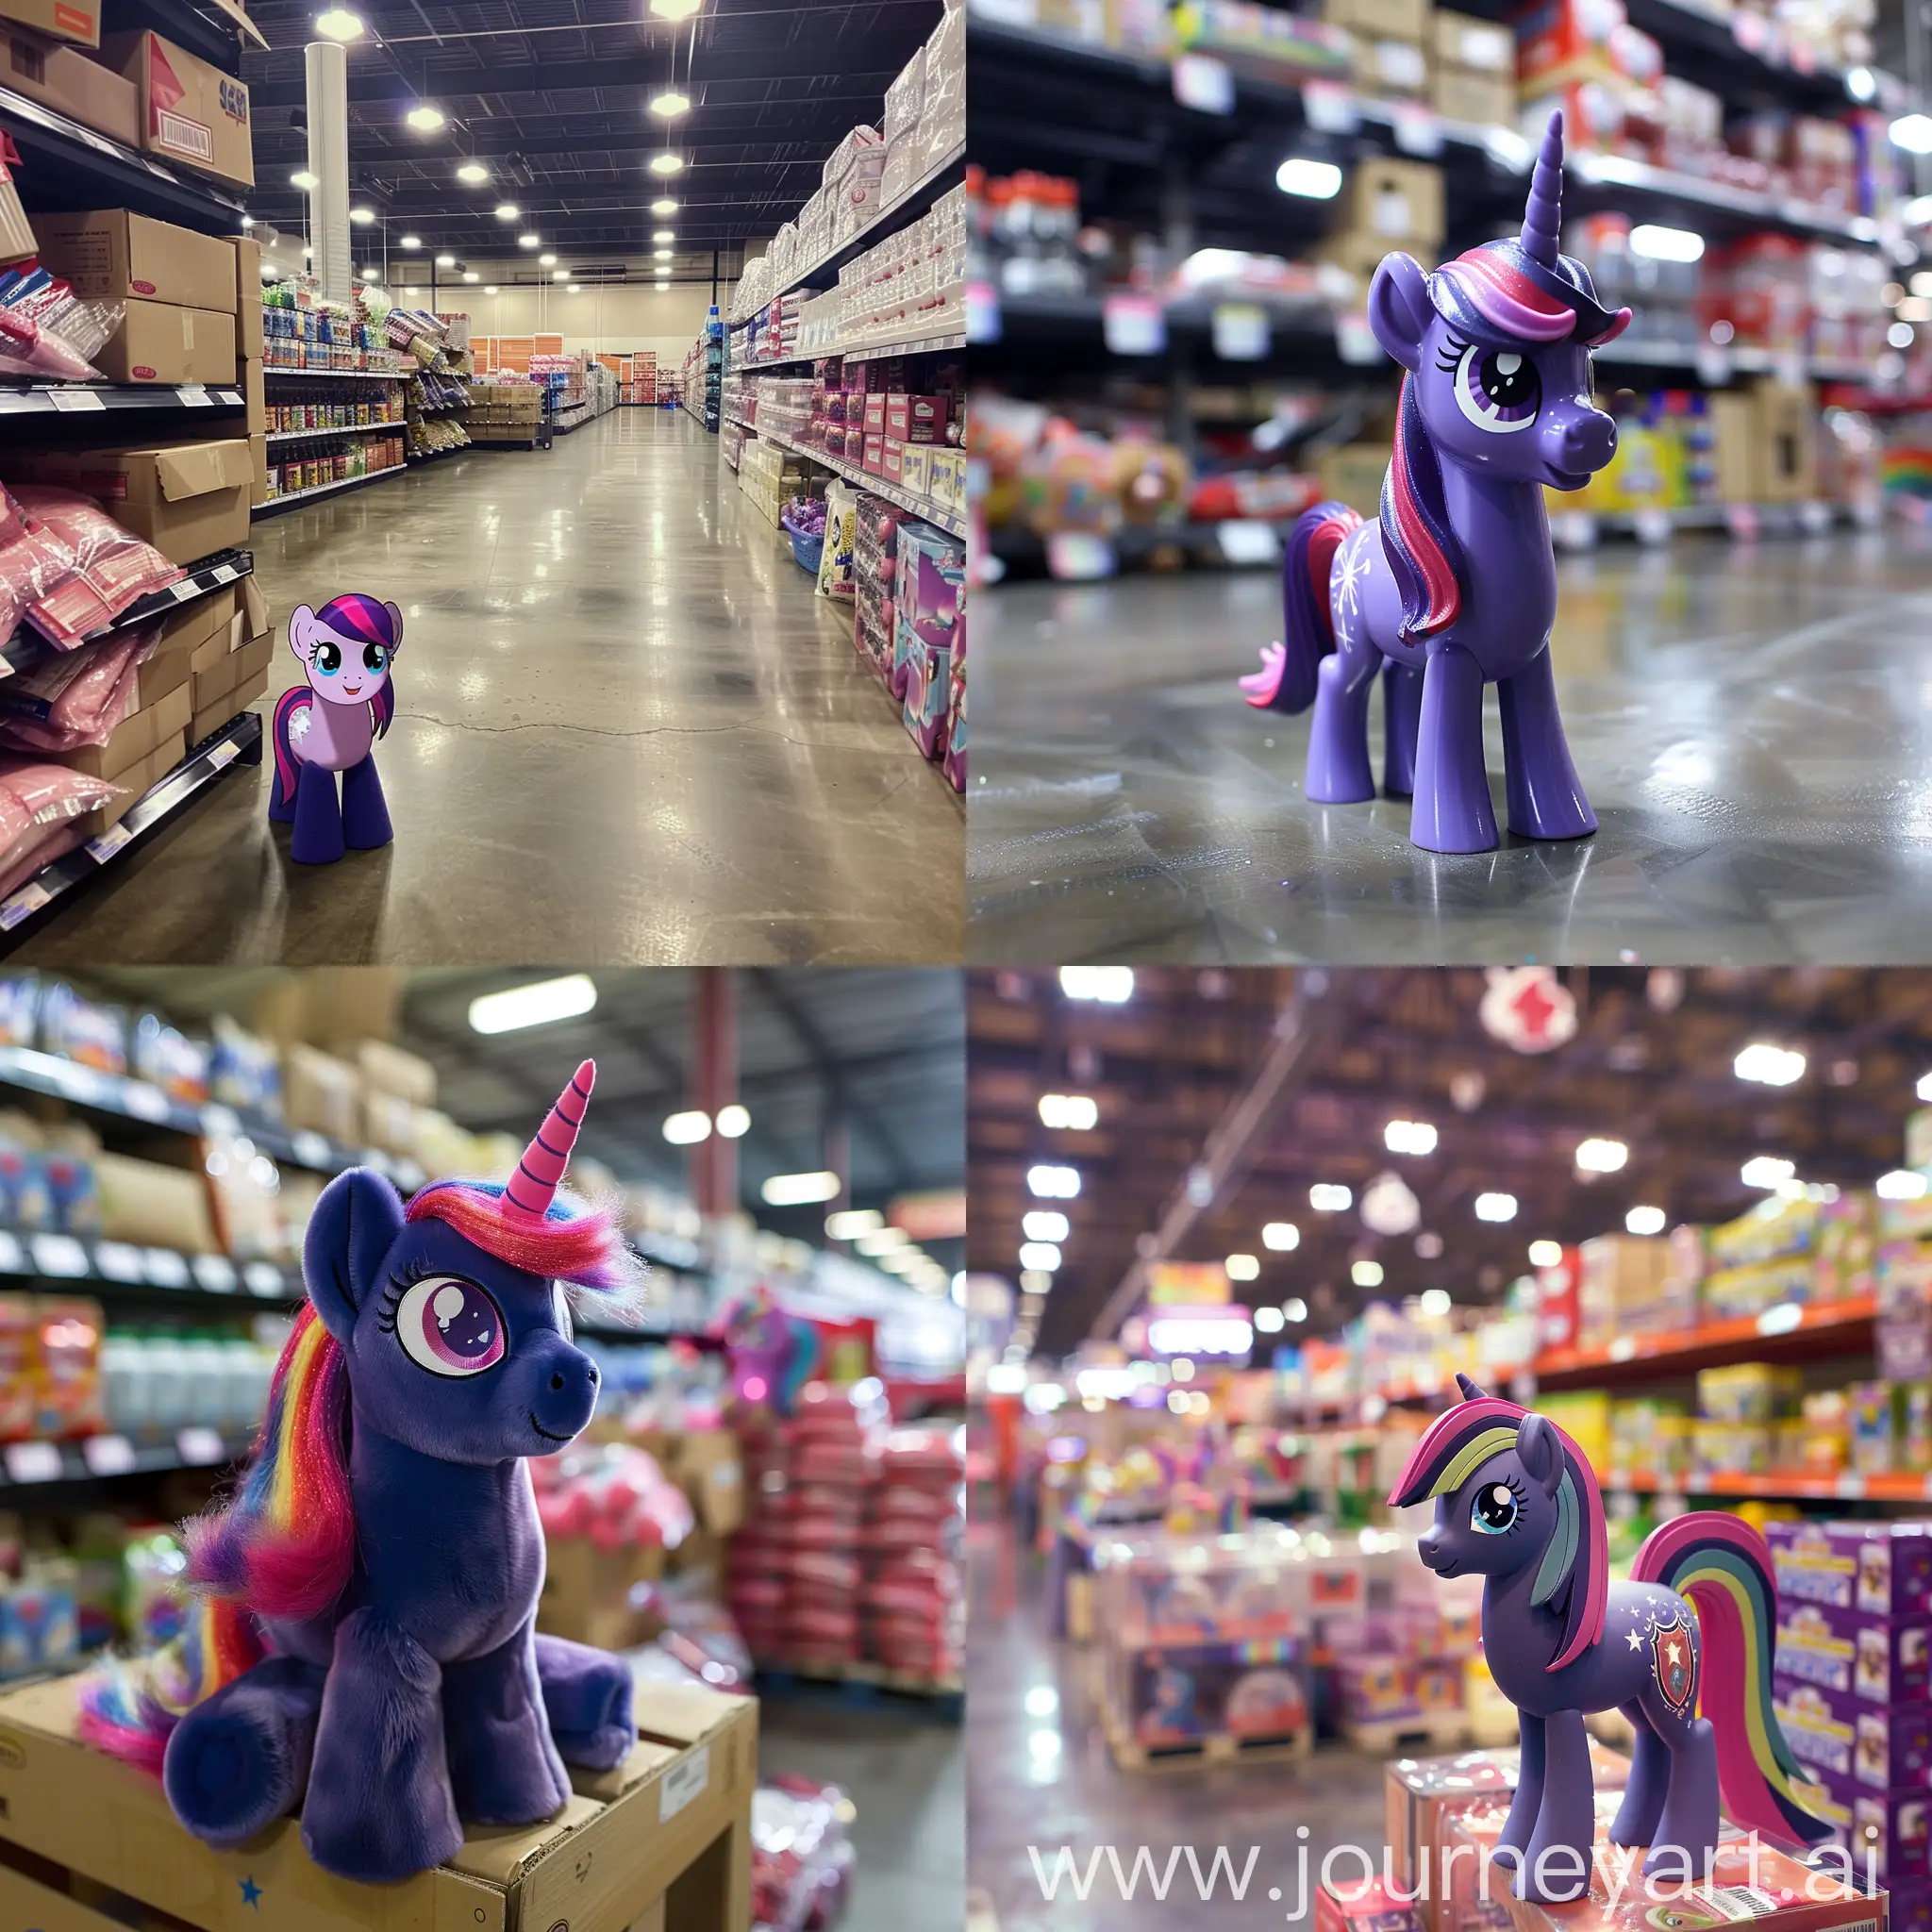 My little pony, Twilight Sparkle at a Costco